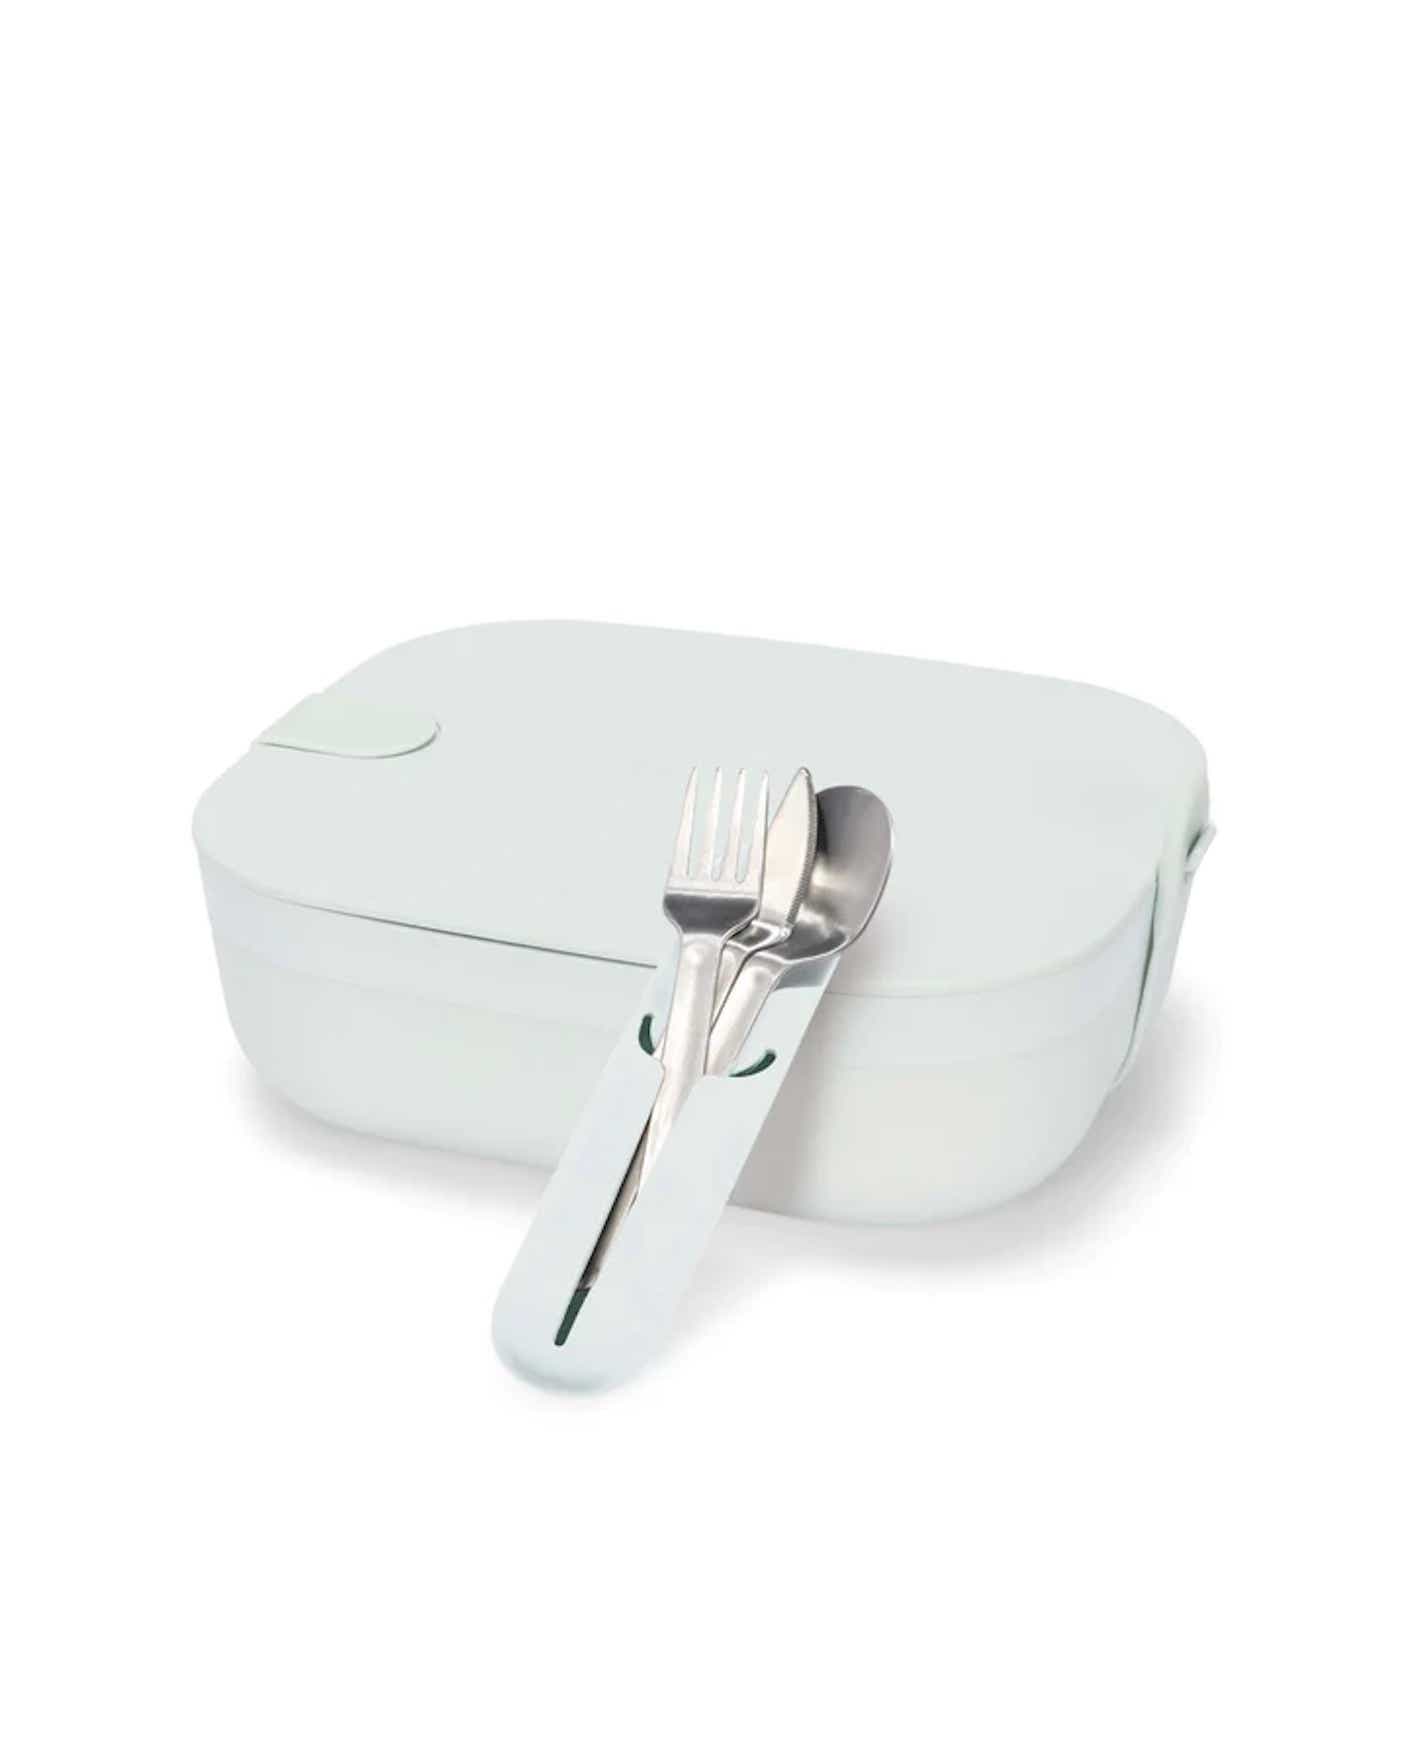 A rigid, rectangular Bento-inspired lunch box comes with a silverware set that includes a fork and spoon in a silicone sleeve.